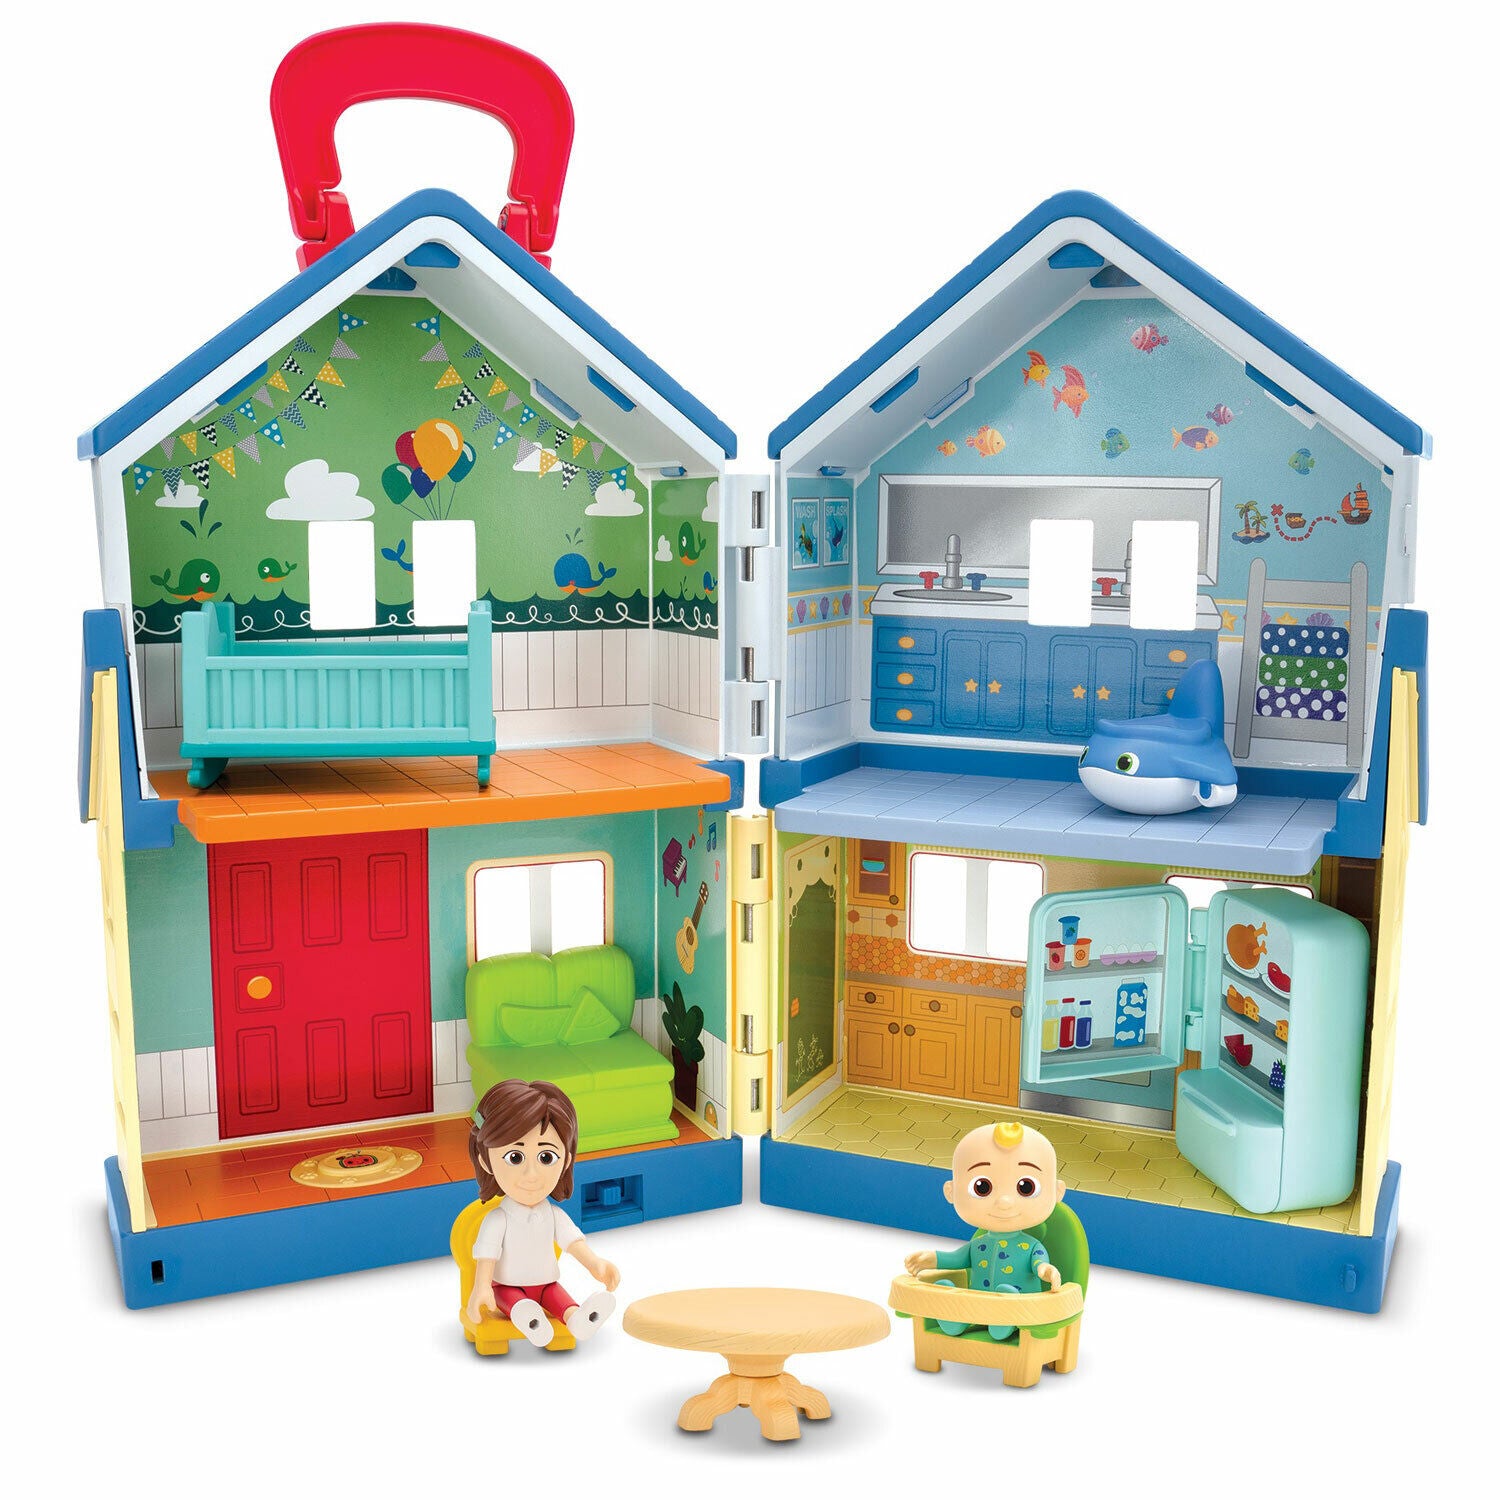 New CoComelon Deluxe Family House Playset - Hours of Fun!